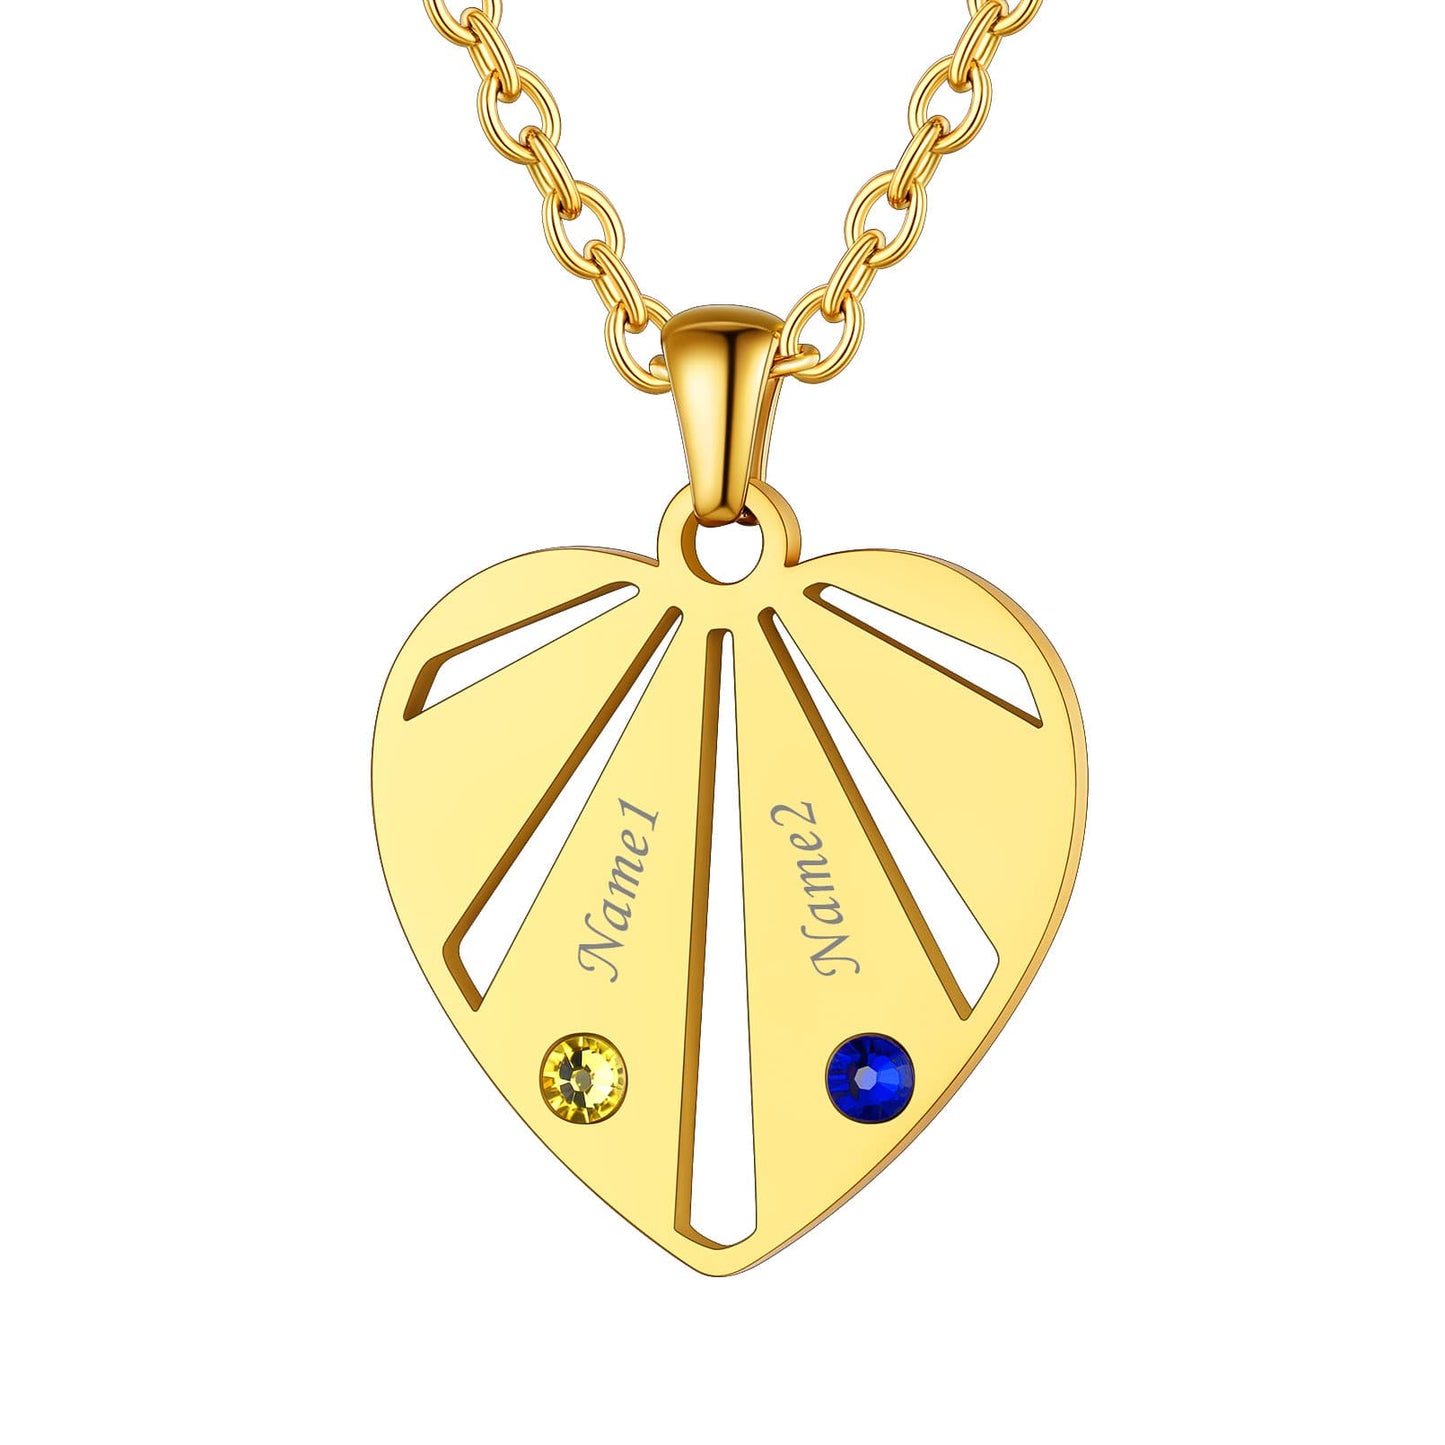 Personalized Engraved Heart Birthstone Necklace gold 2 stones